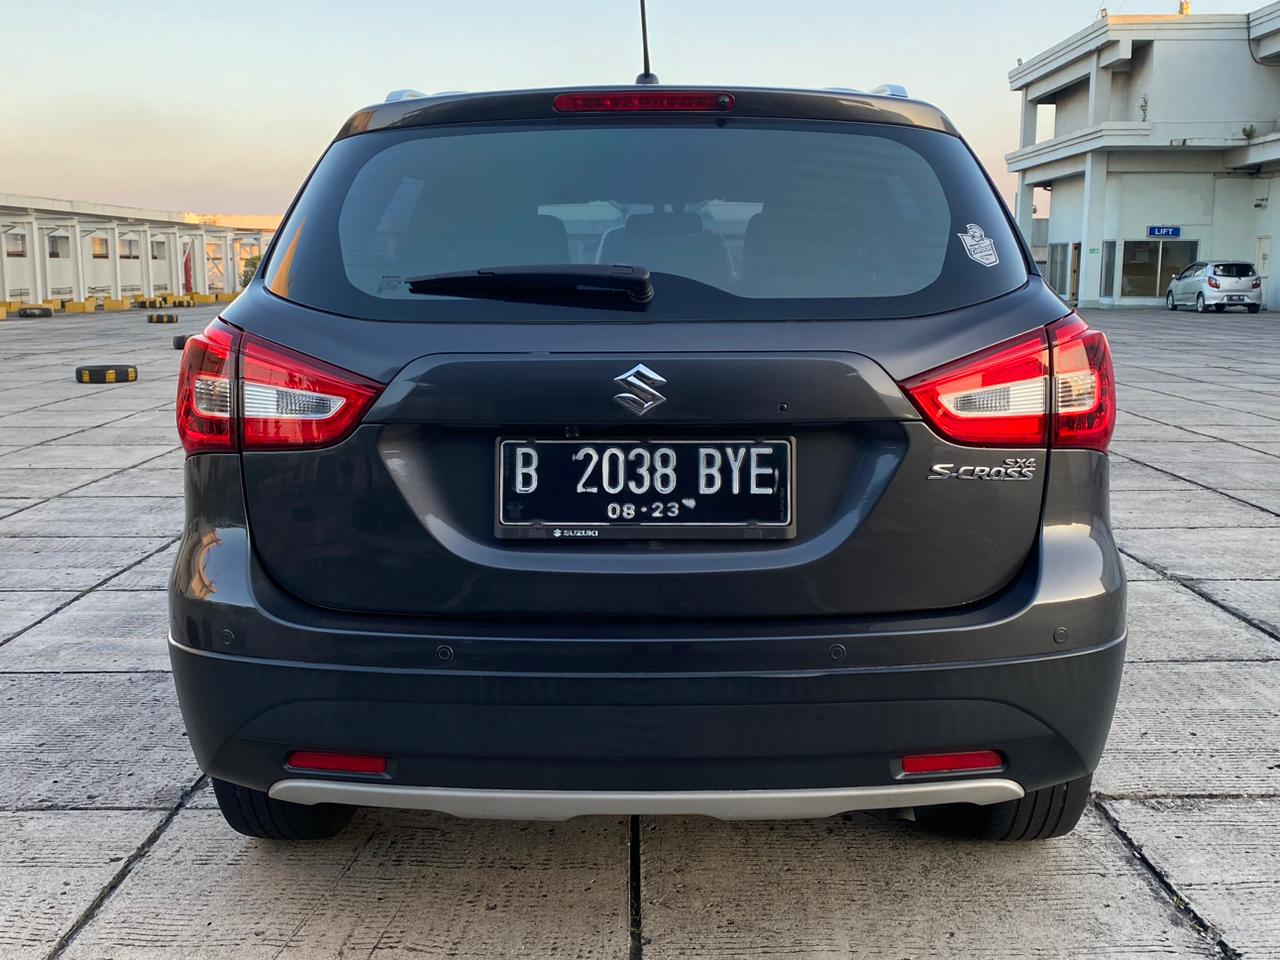 Used 2018 Suzuki SX4 S Cross AT AT for sale